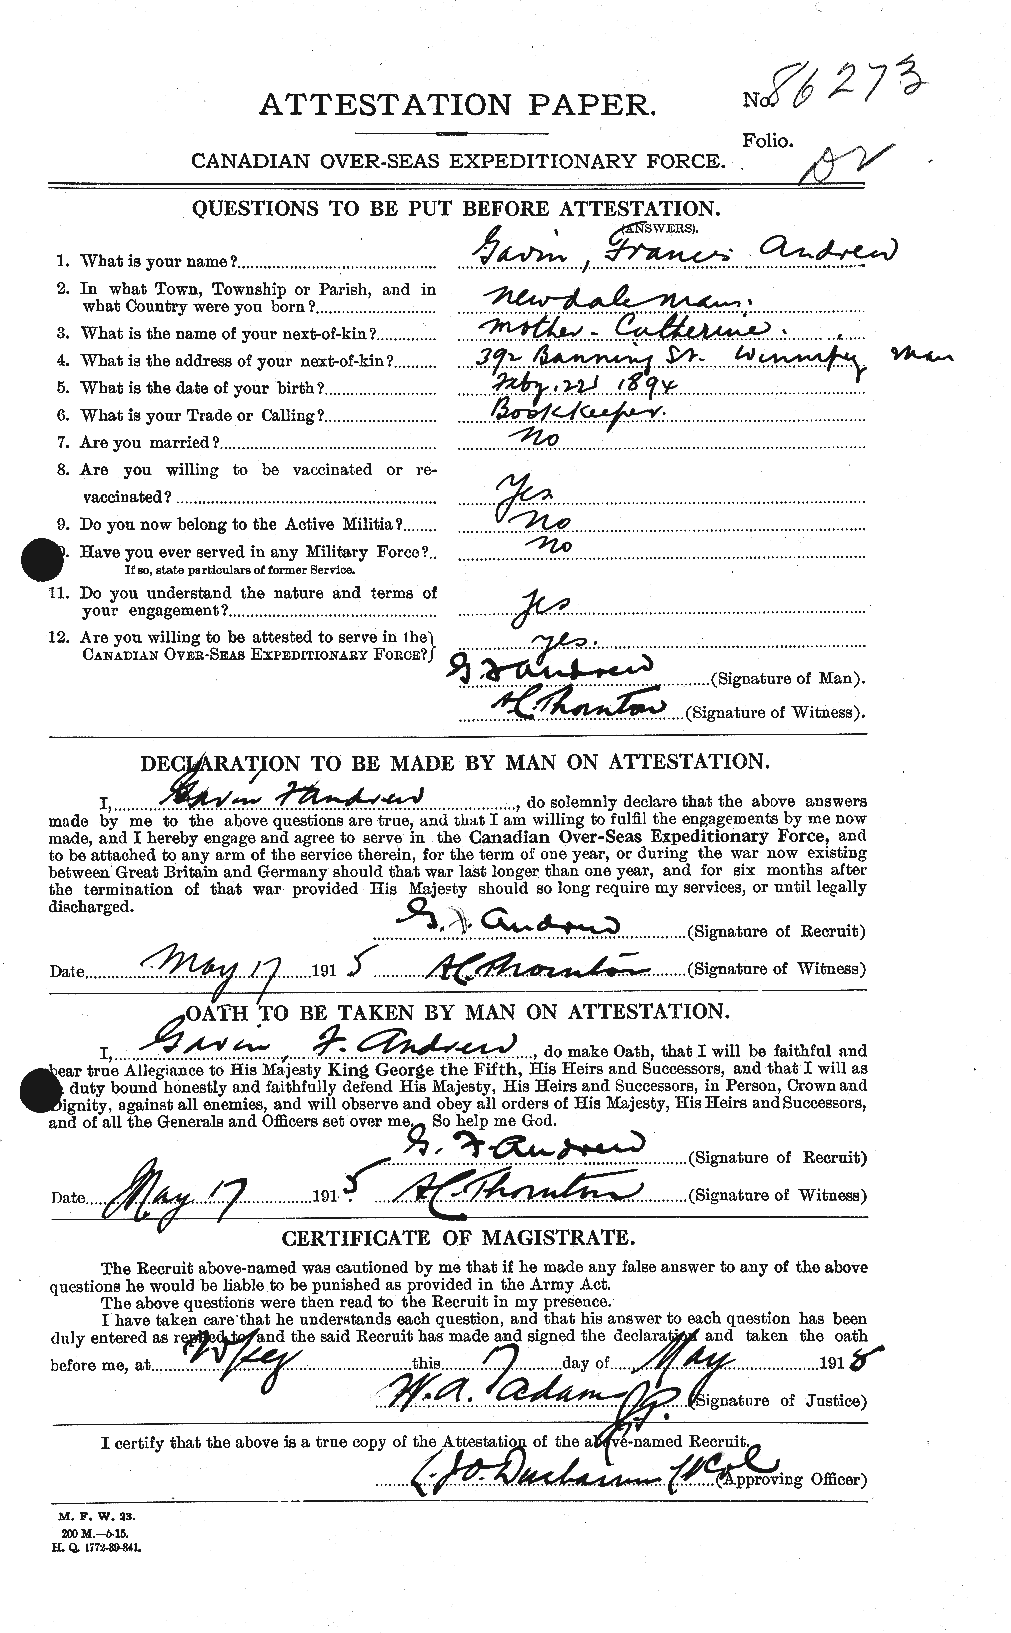 Personnel Records of the First World War - CEF 210976a